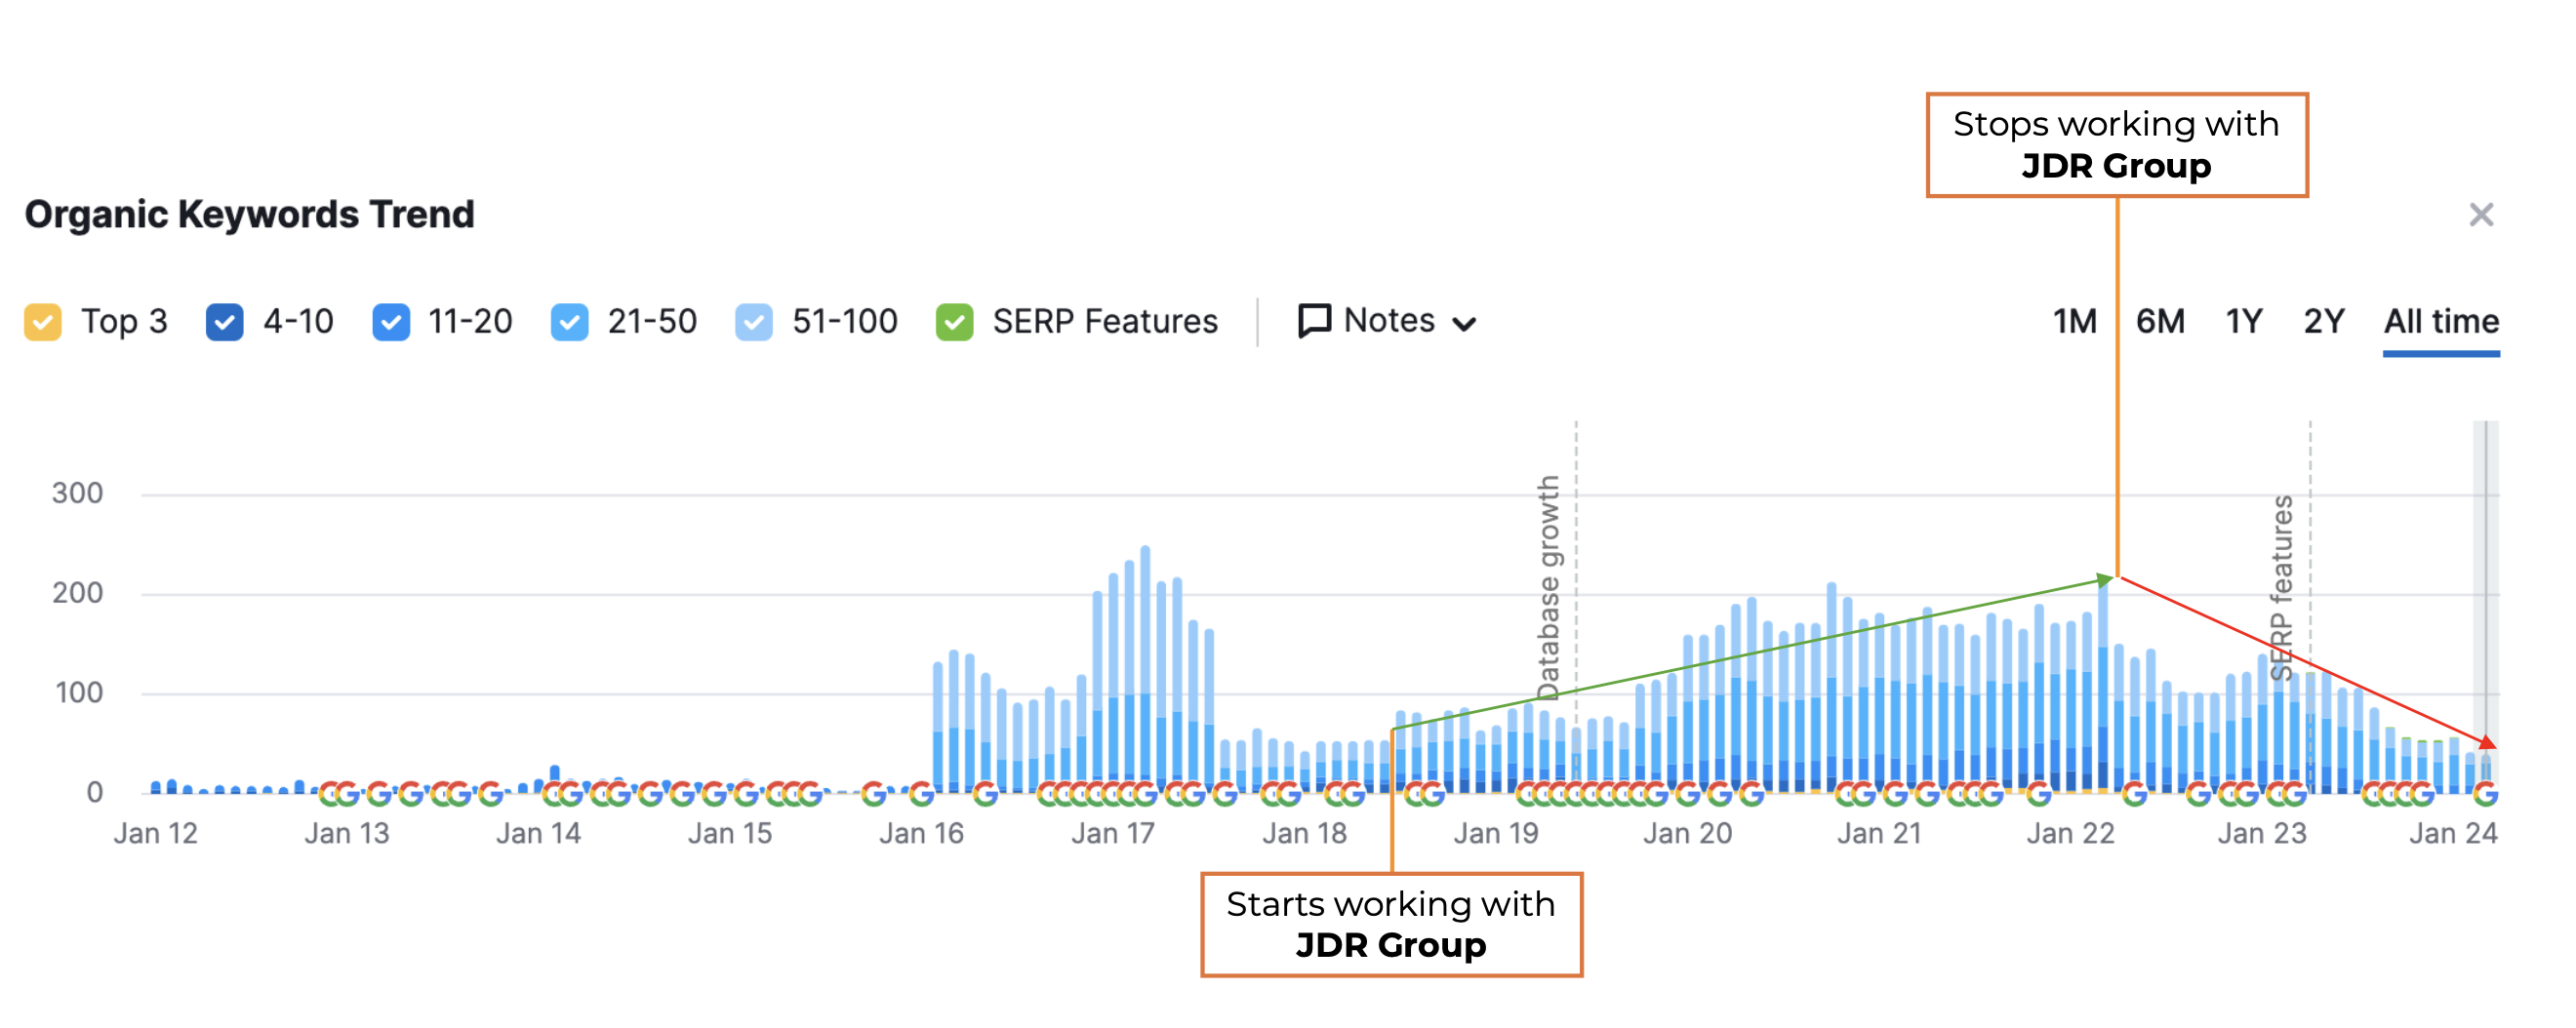 JDR Group Case Study - before and after stopping inbound marketing - 4